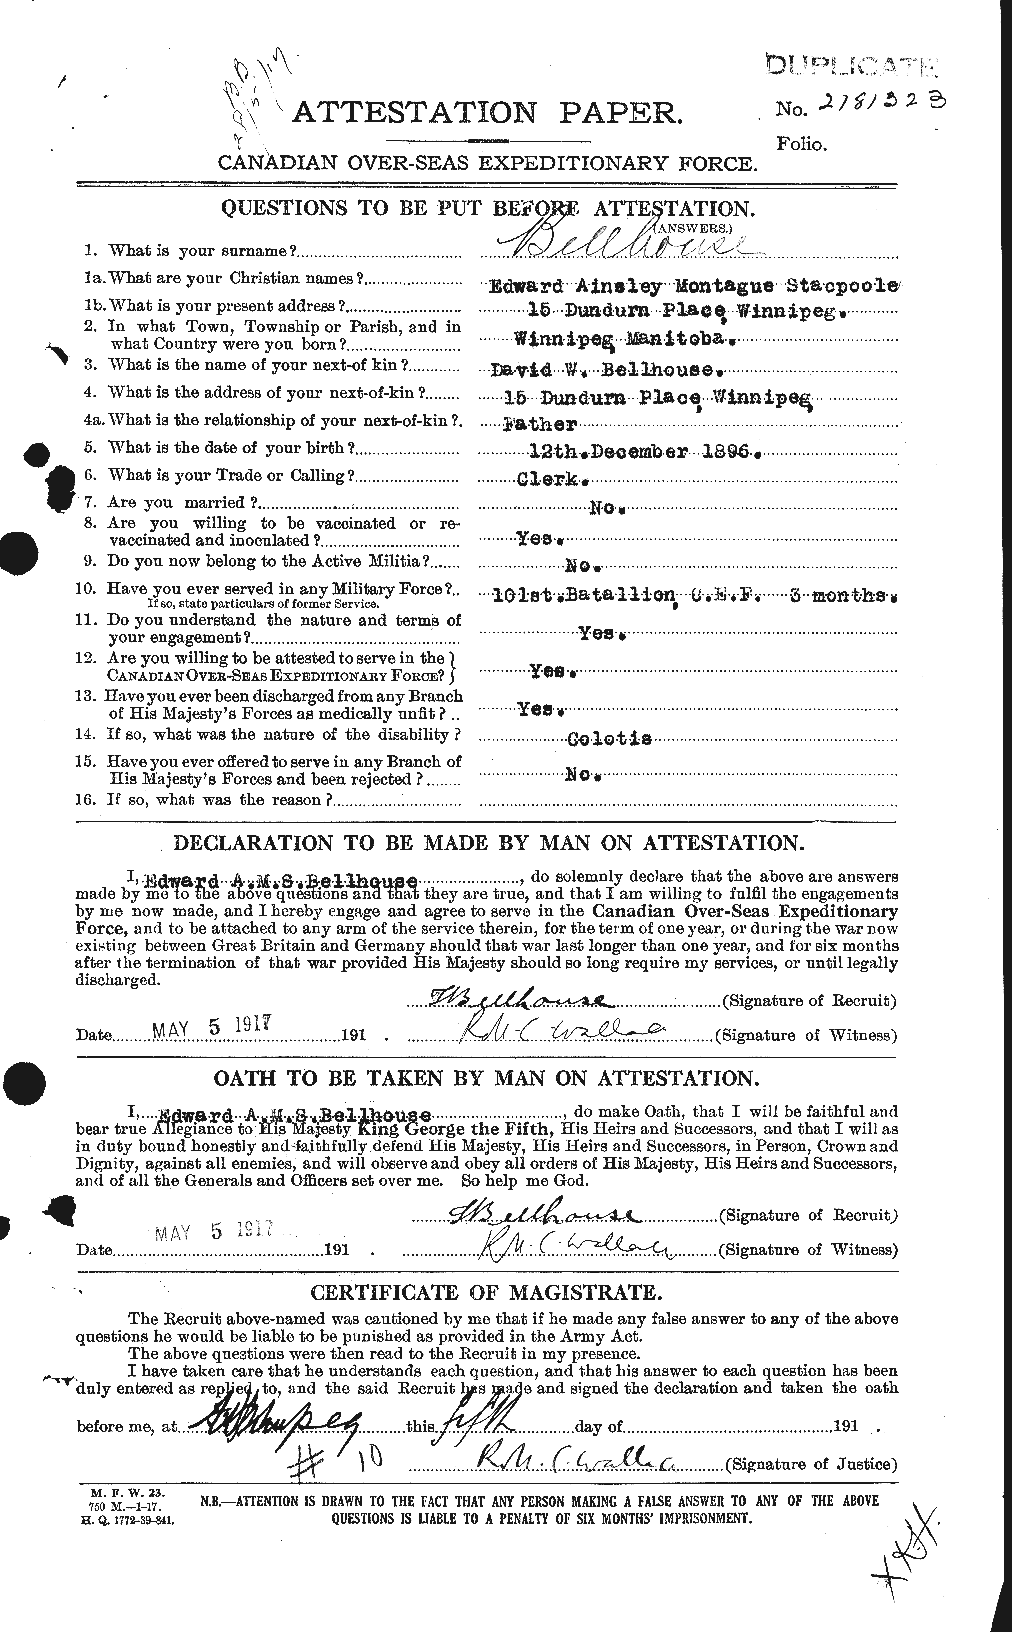 Personnel Records of the First World War - CEF 239367a